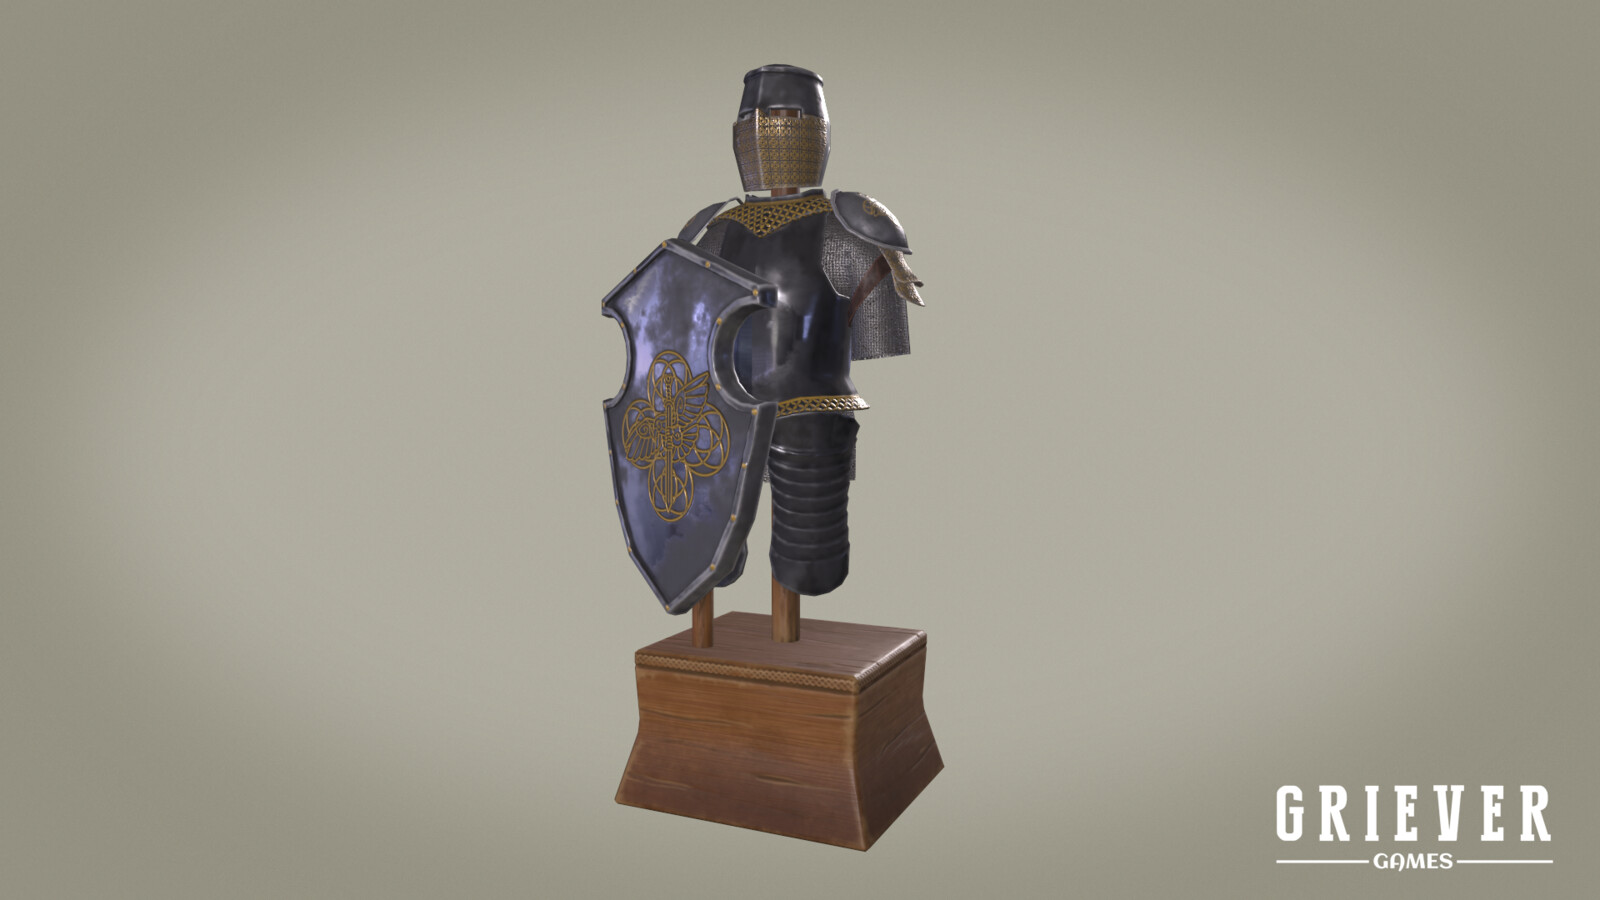 Suit of Armor for Display | Griever Games Environment Asset